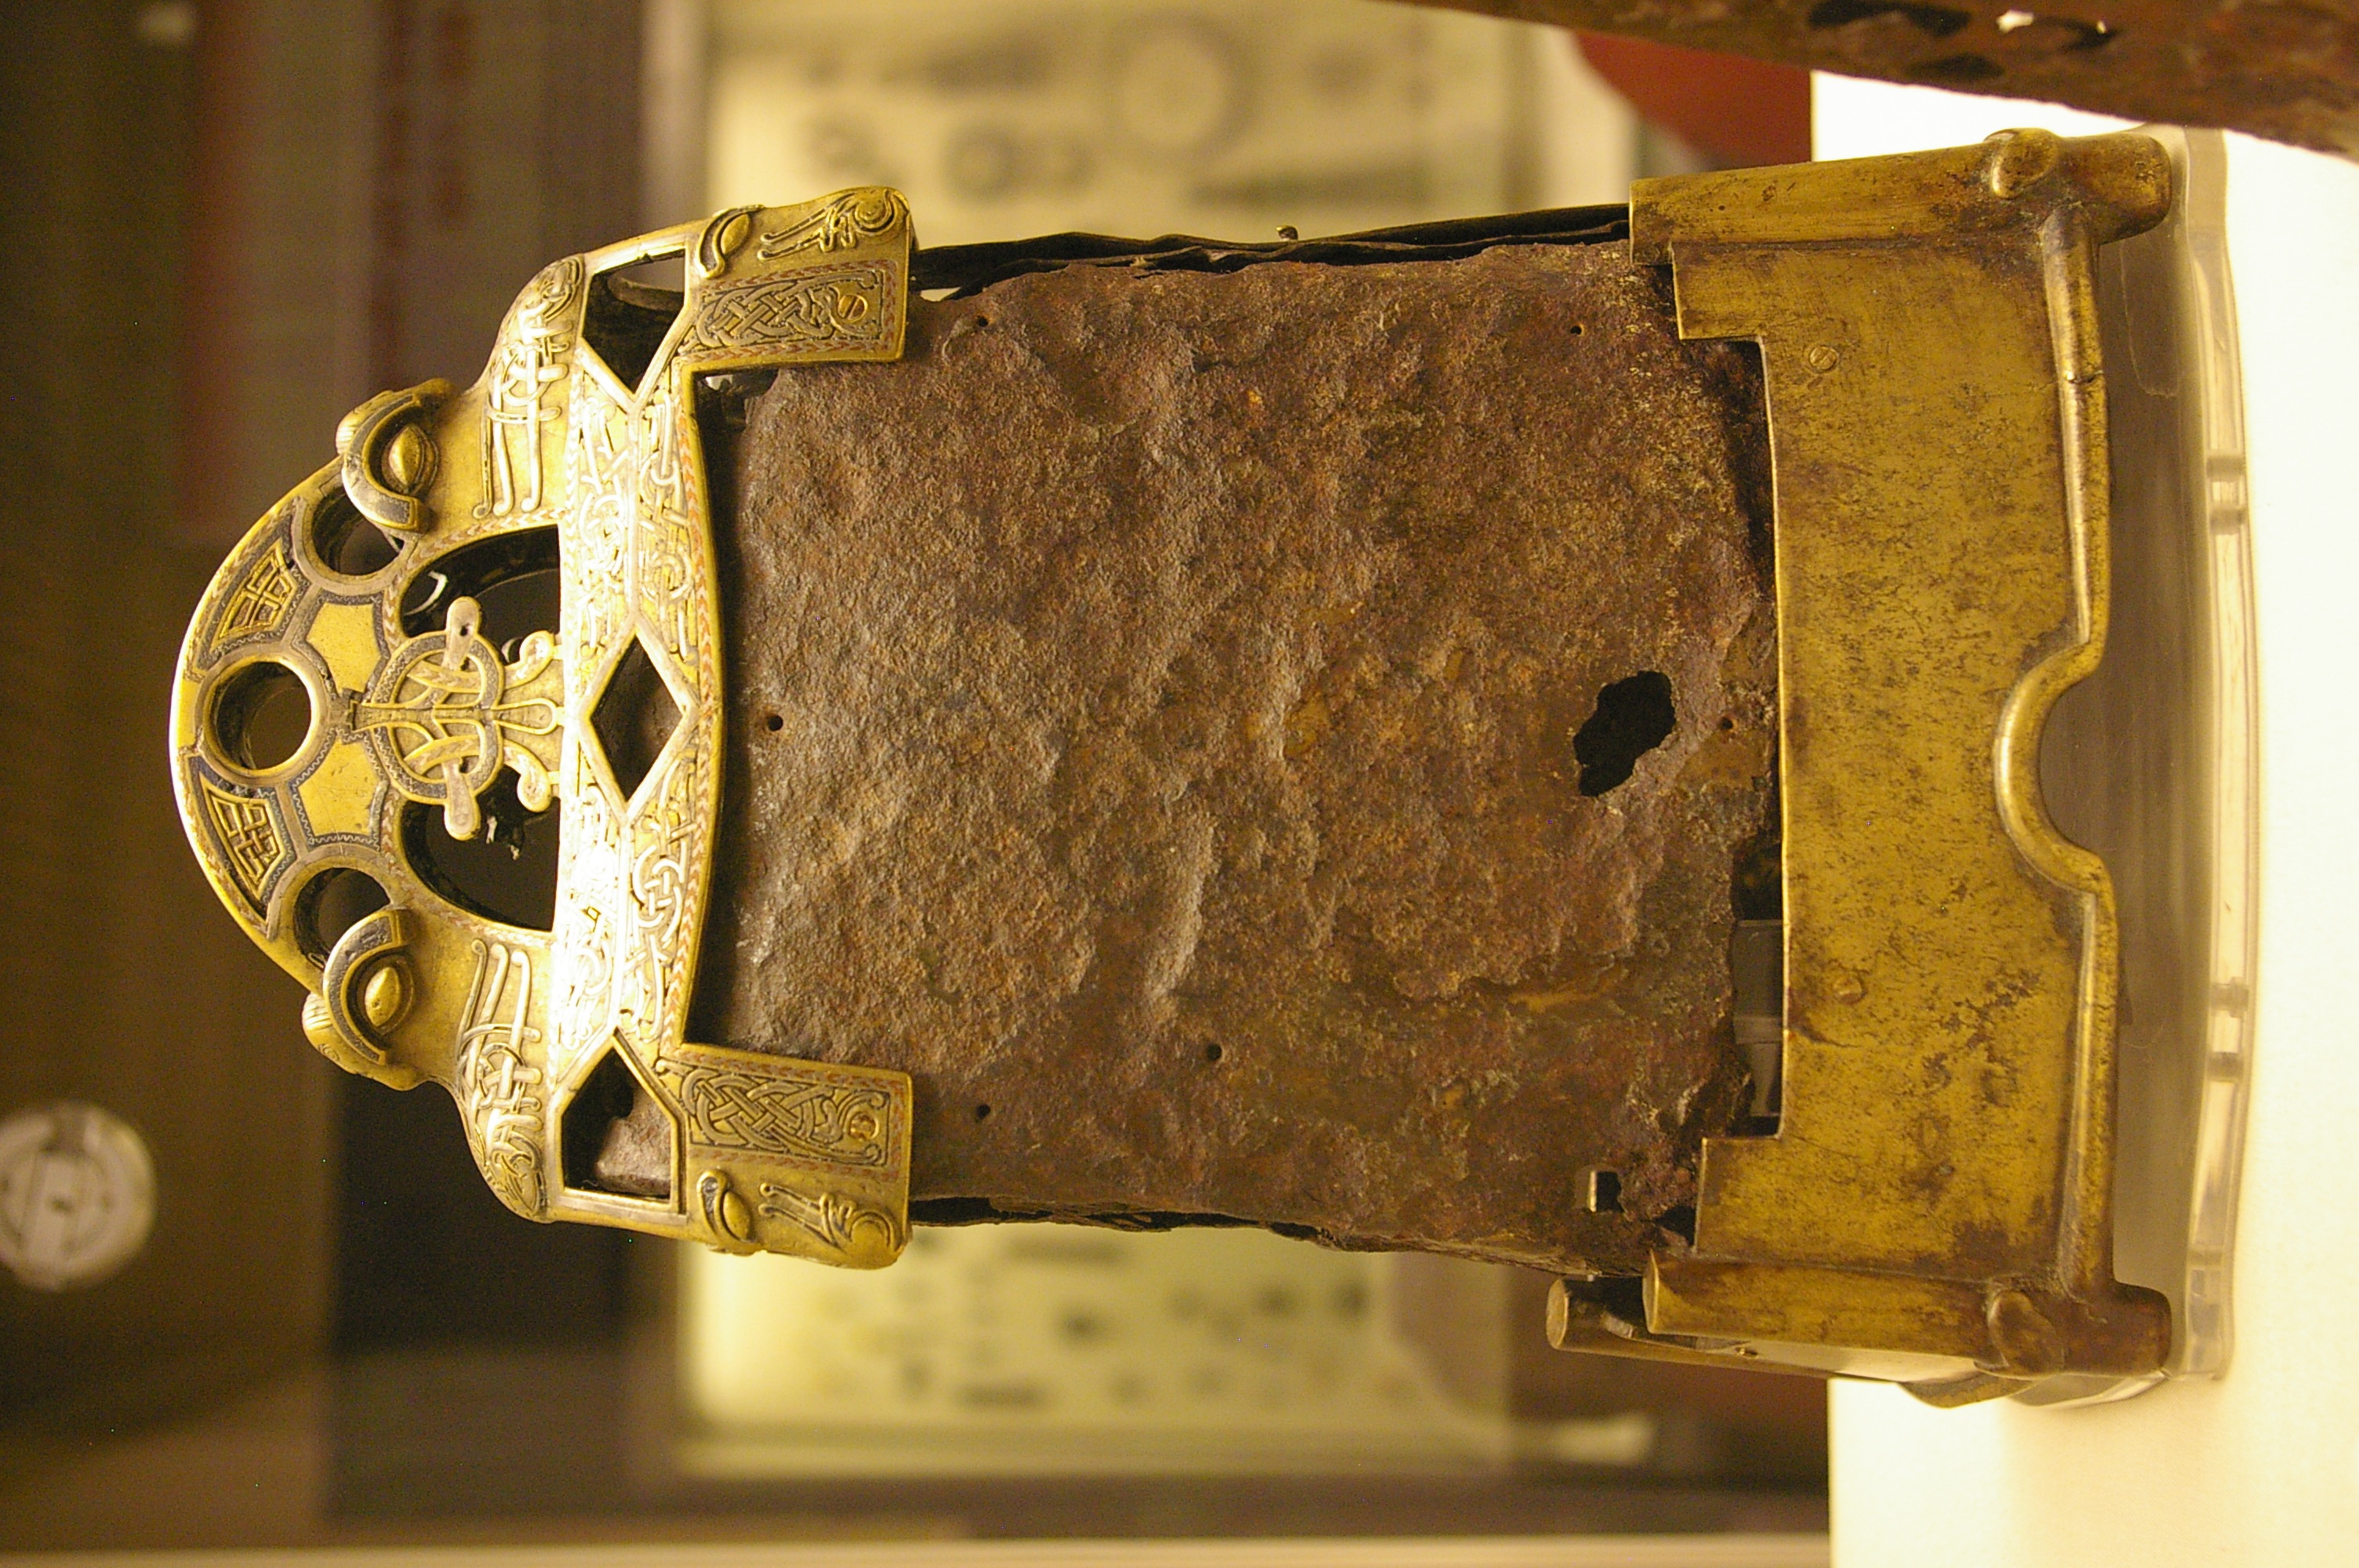 St. Cuilean’s Bell by Unknown Artist - 8th - 11th century - 30 cm  x 24 cm British Museum